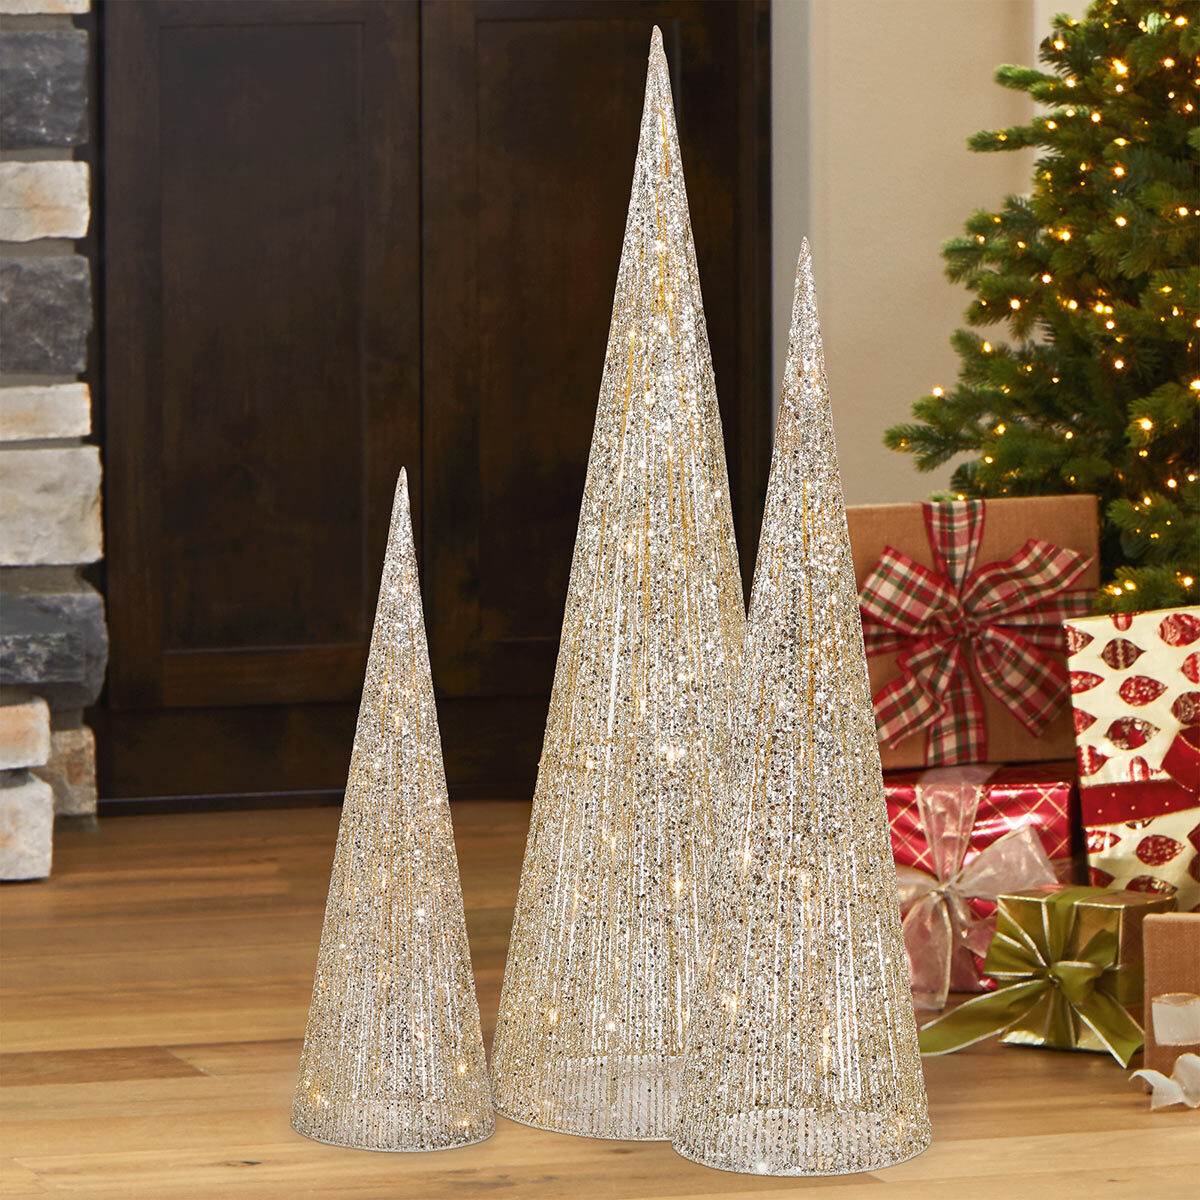 Buy Glitter String Cones Set of 3 LED Indoor Lifestyle2 Image at Costco.co.uk